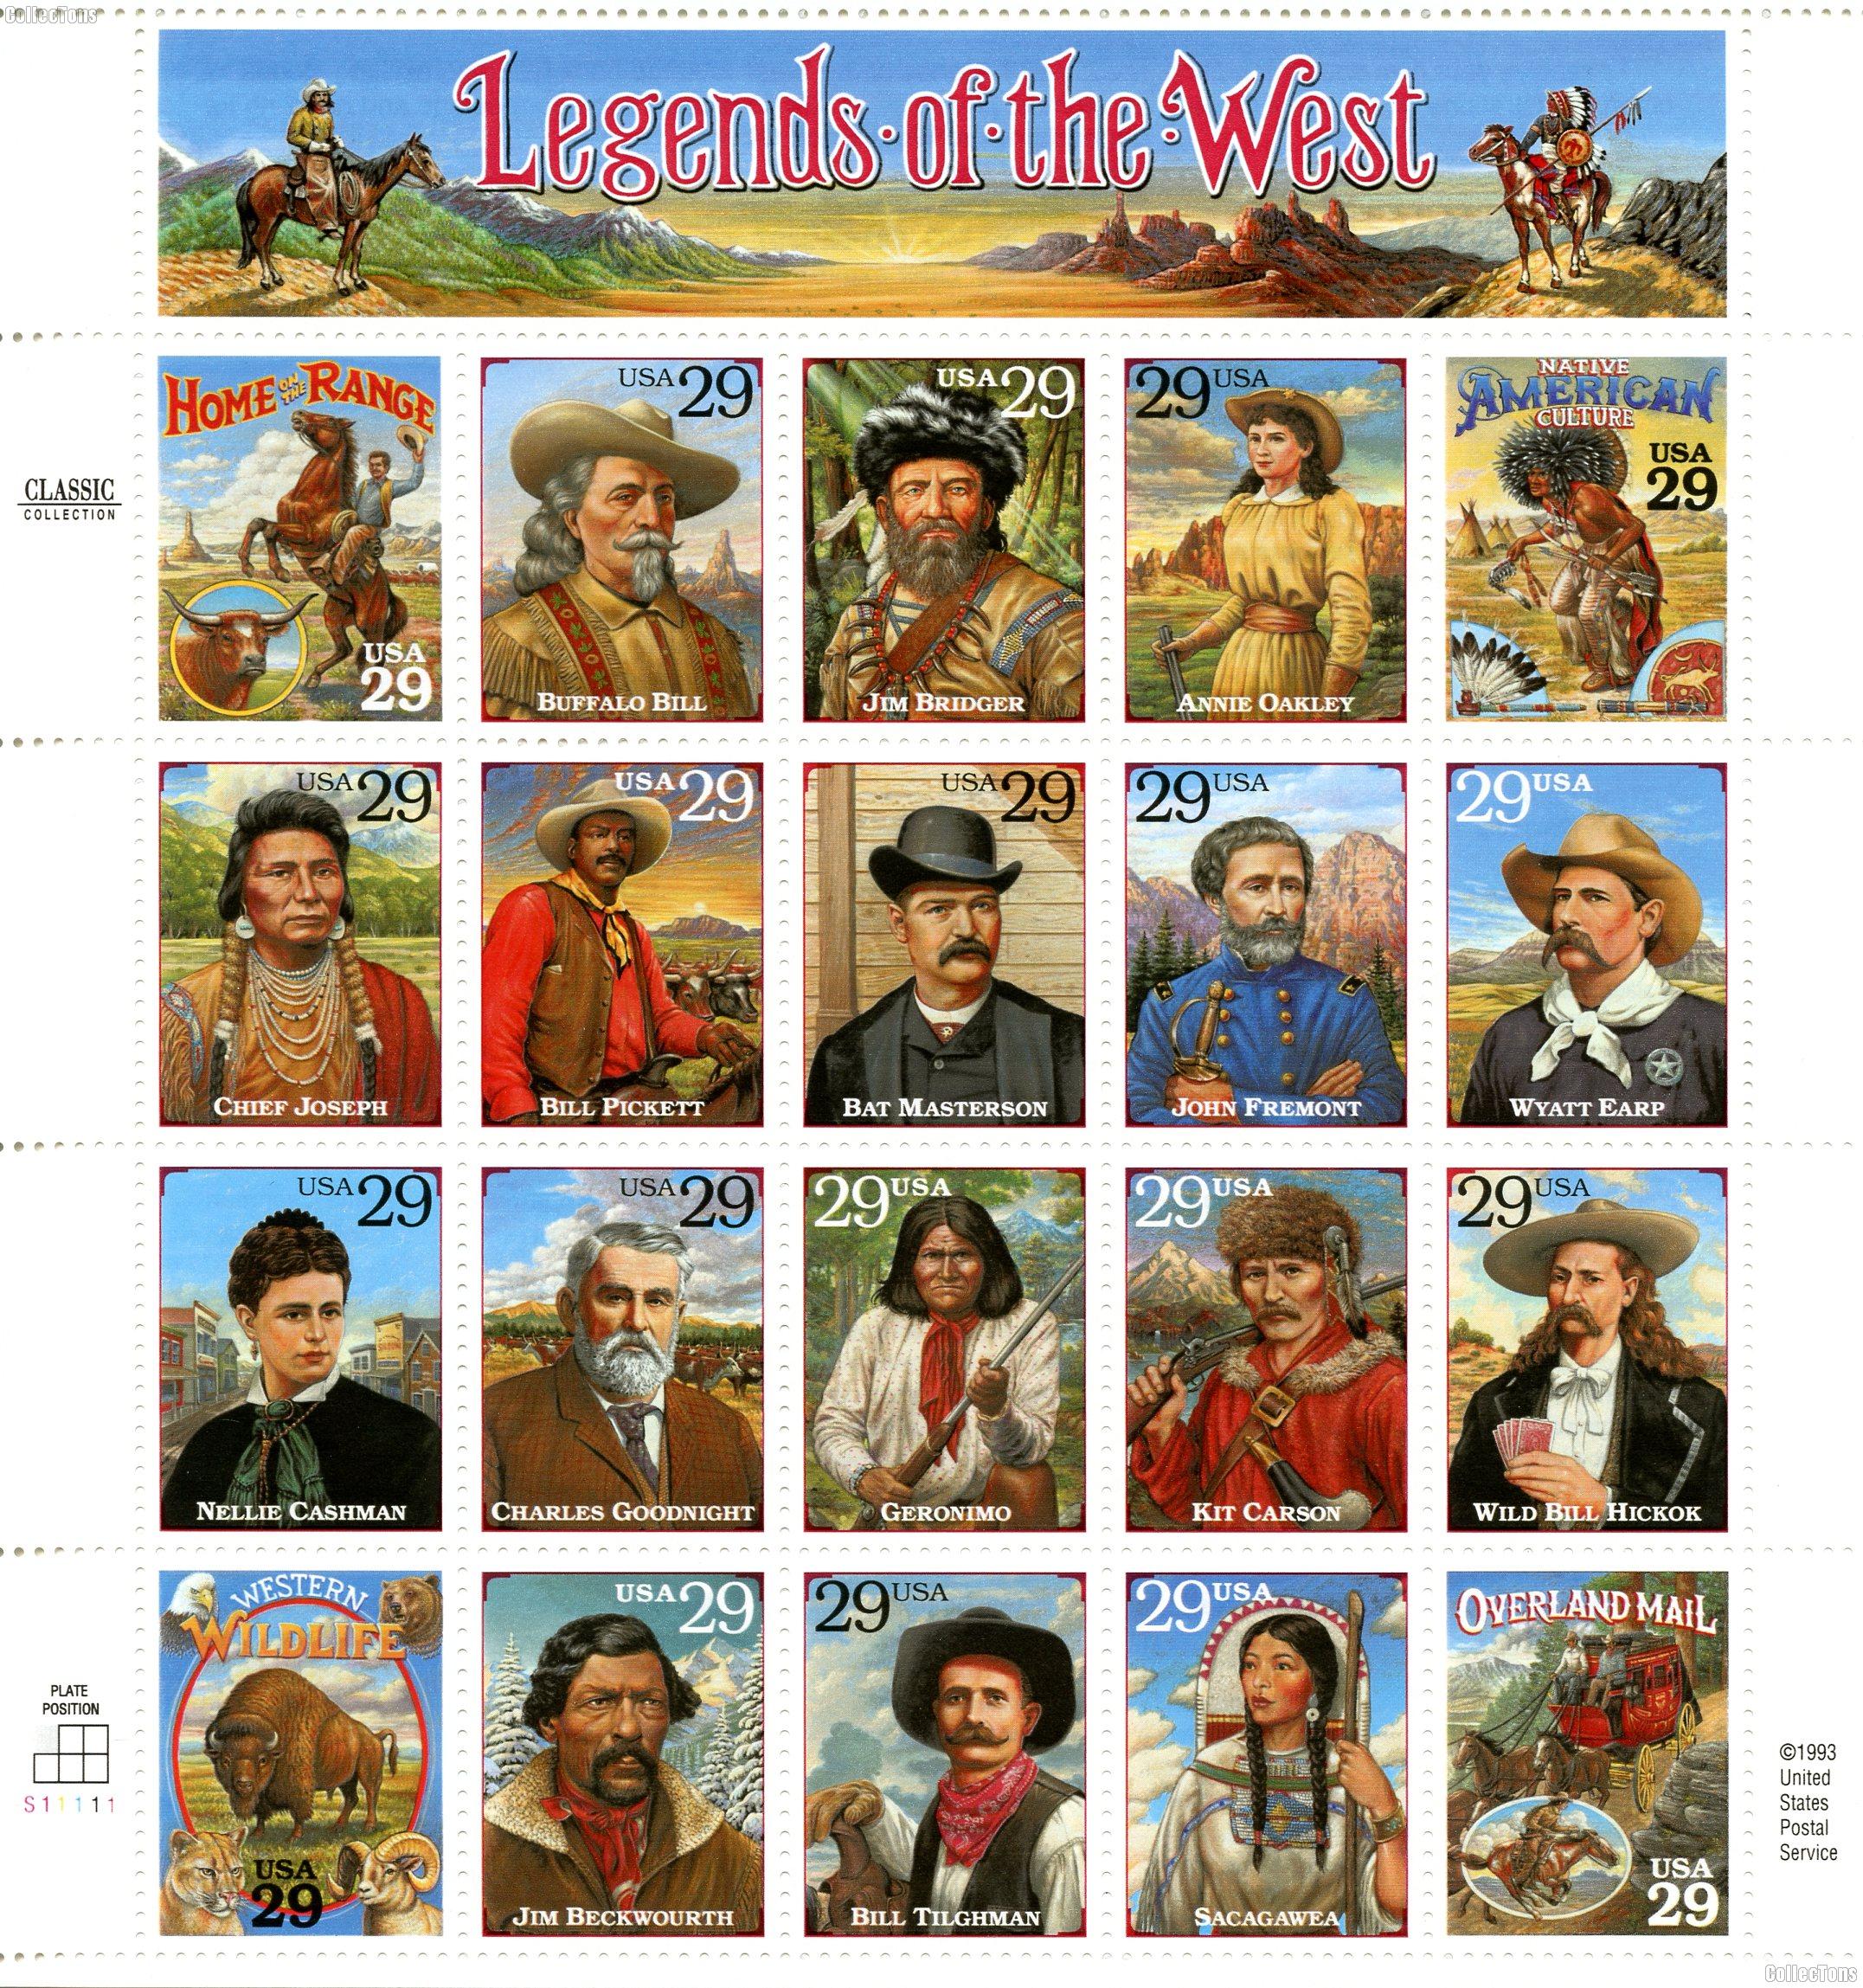 1994 (Recalled) Legends of the West 29 Cent US Postage Stamp MNH Sheet of 20 Scott #2870